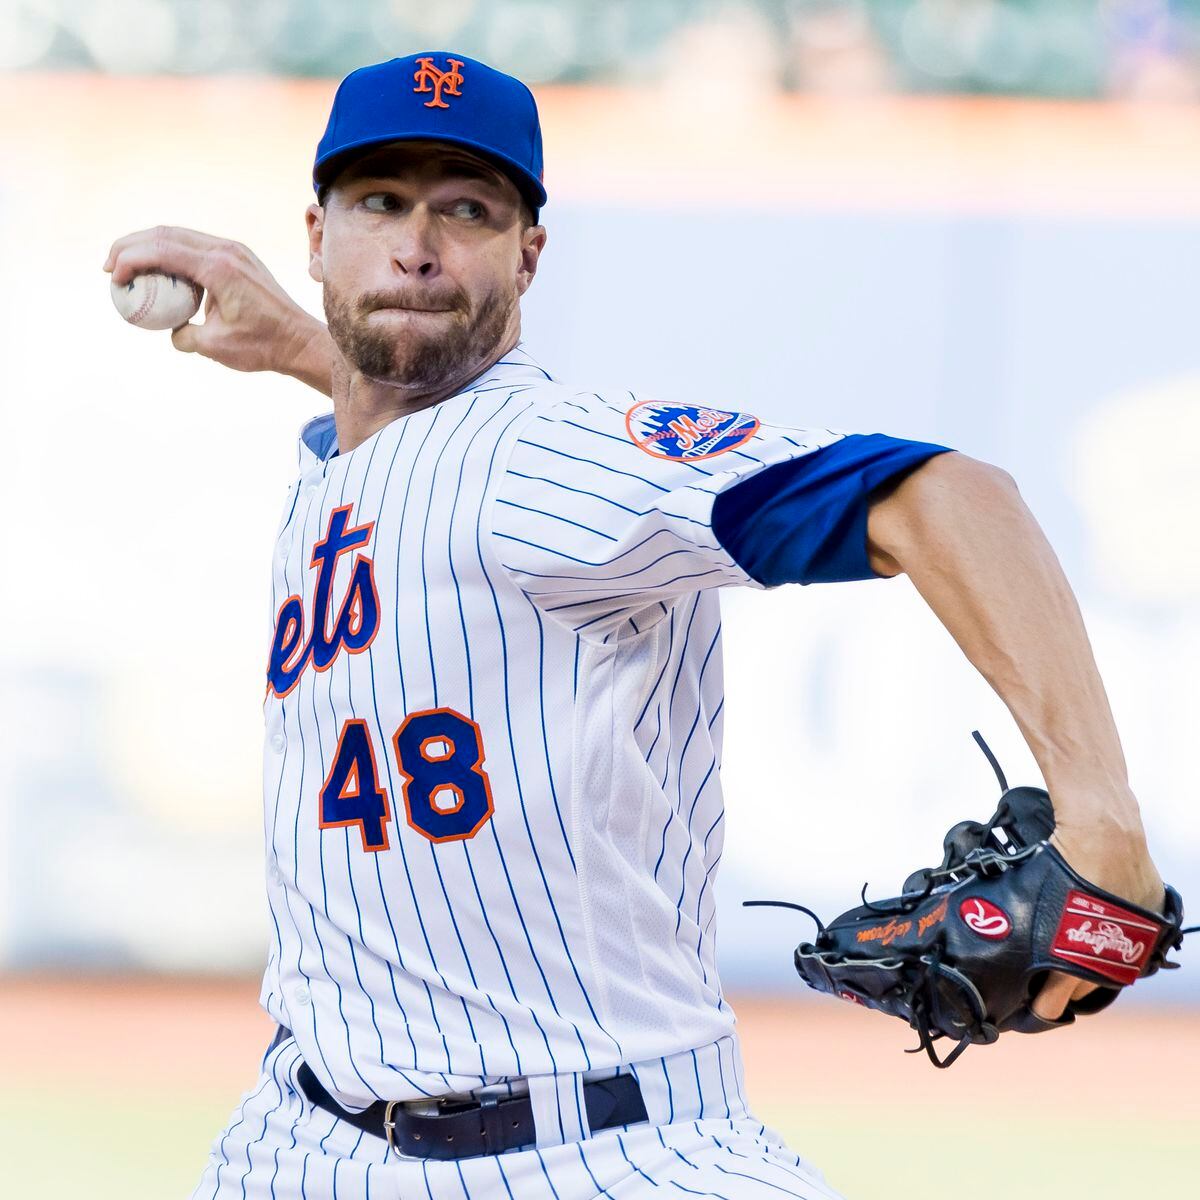 Rosenthal: How will qualifying offer impact free agents? Plus Mets